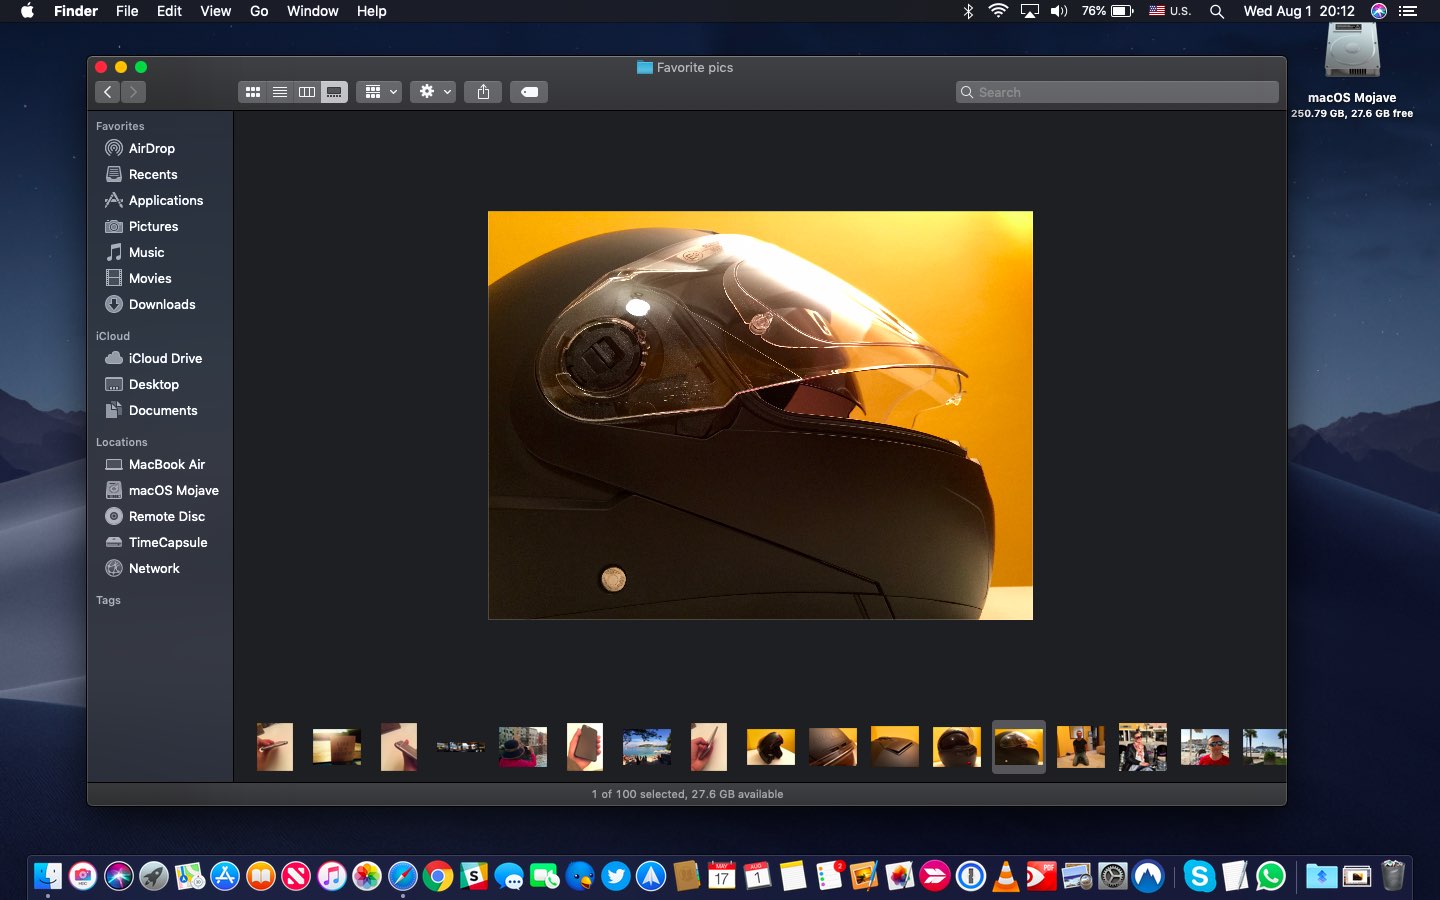 Dark Mode and the Finder's Gallery view on macOS Mojave